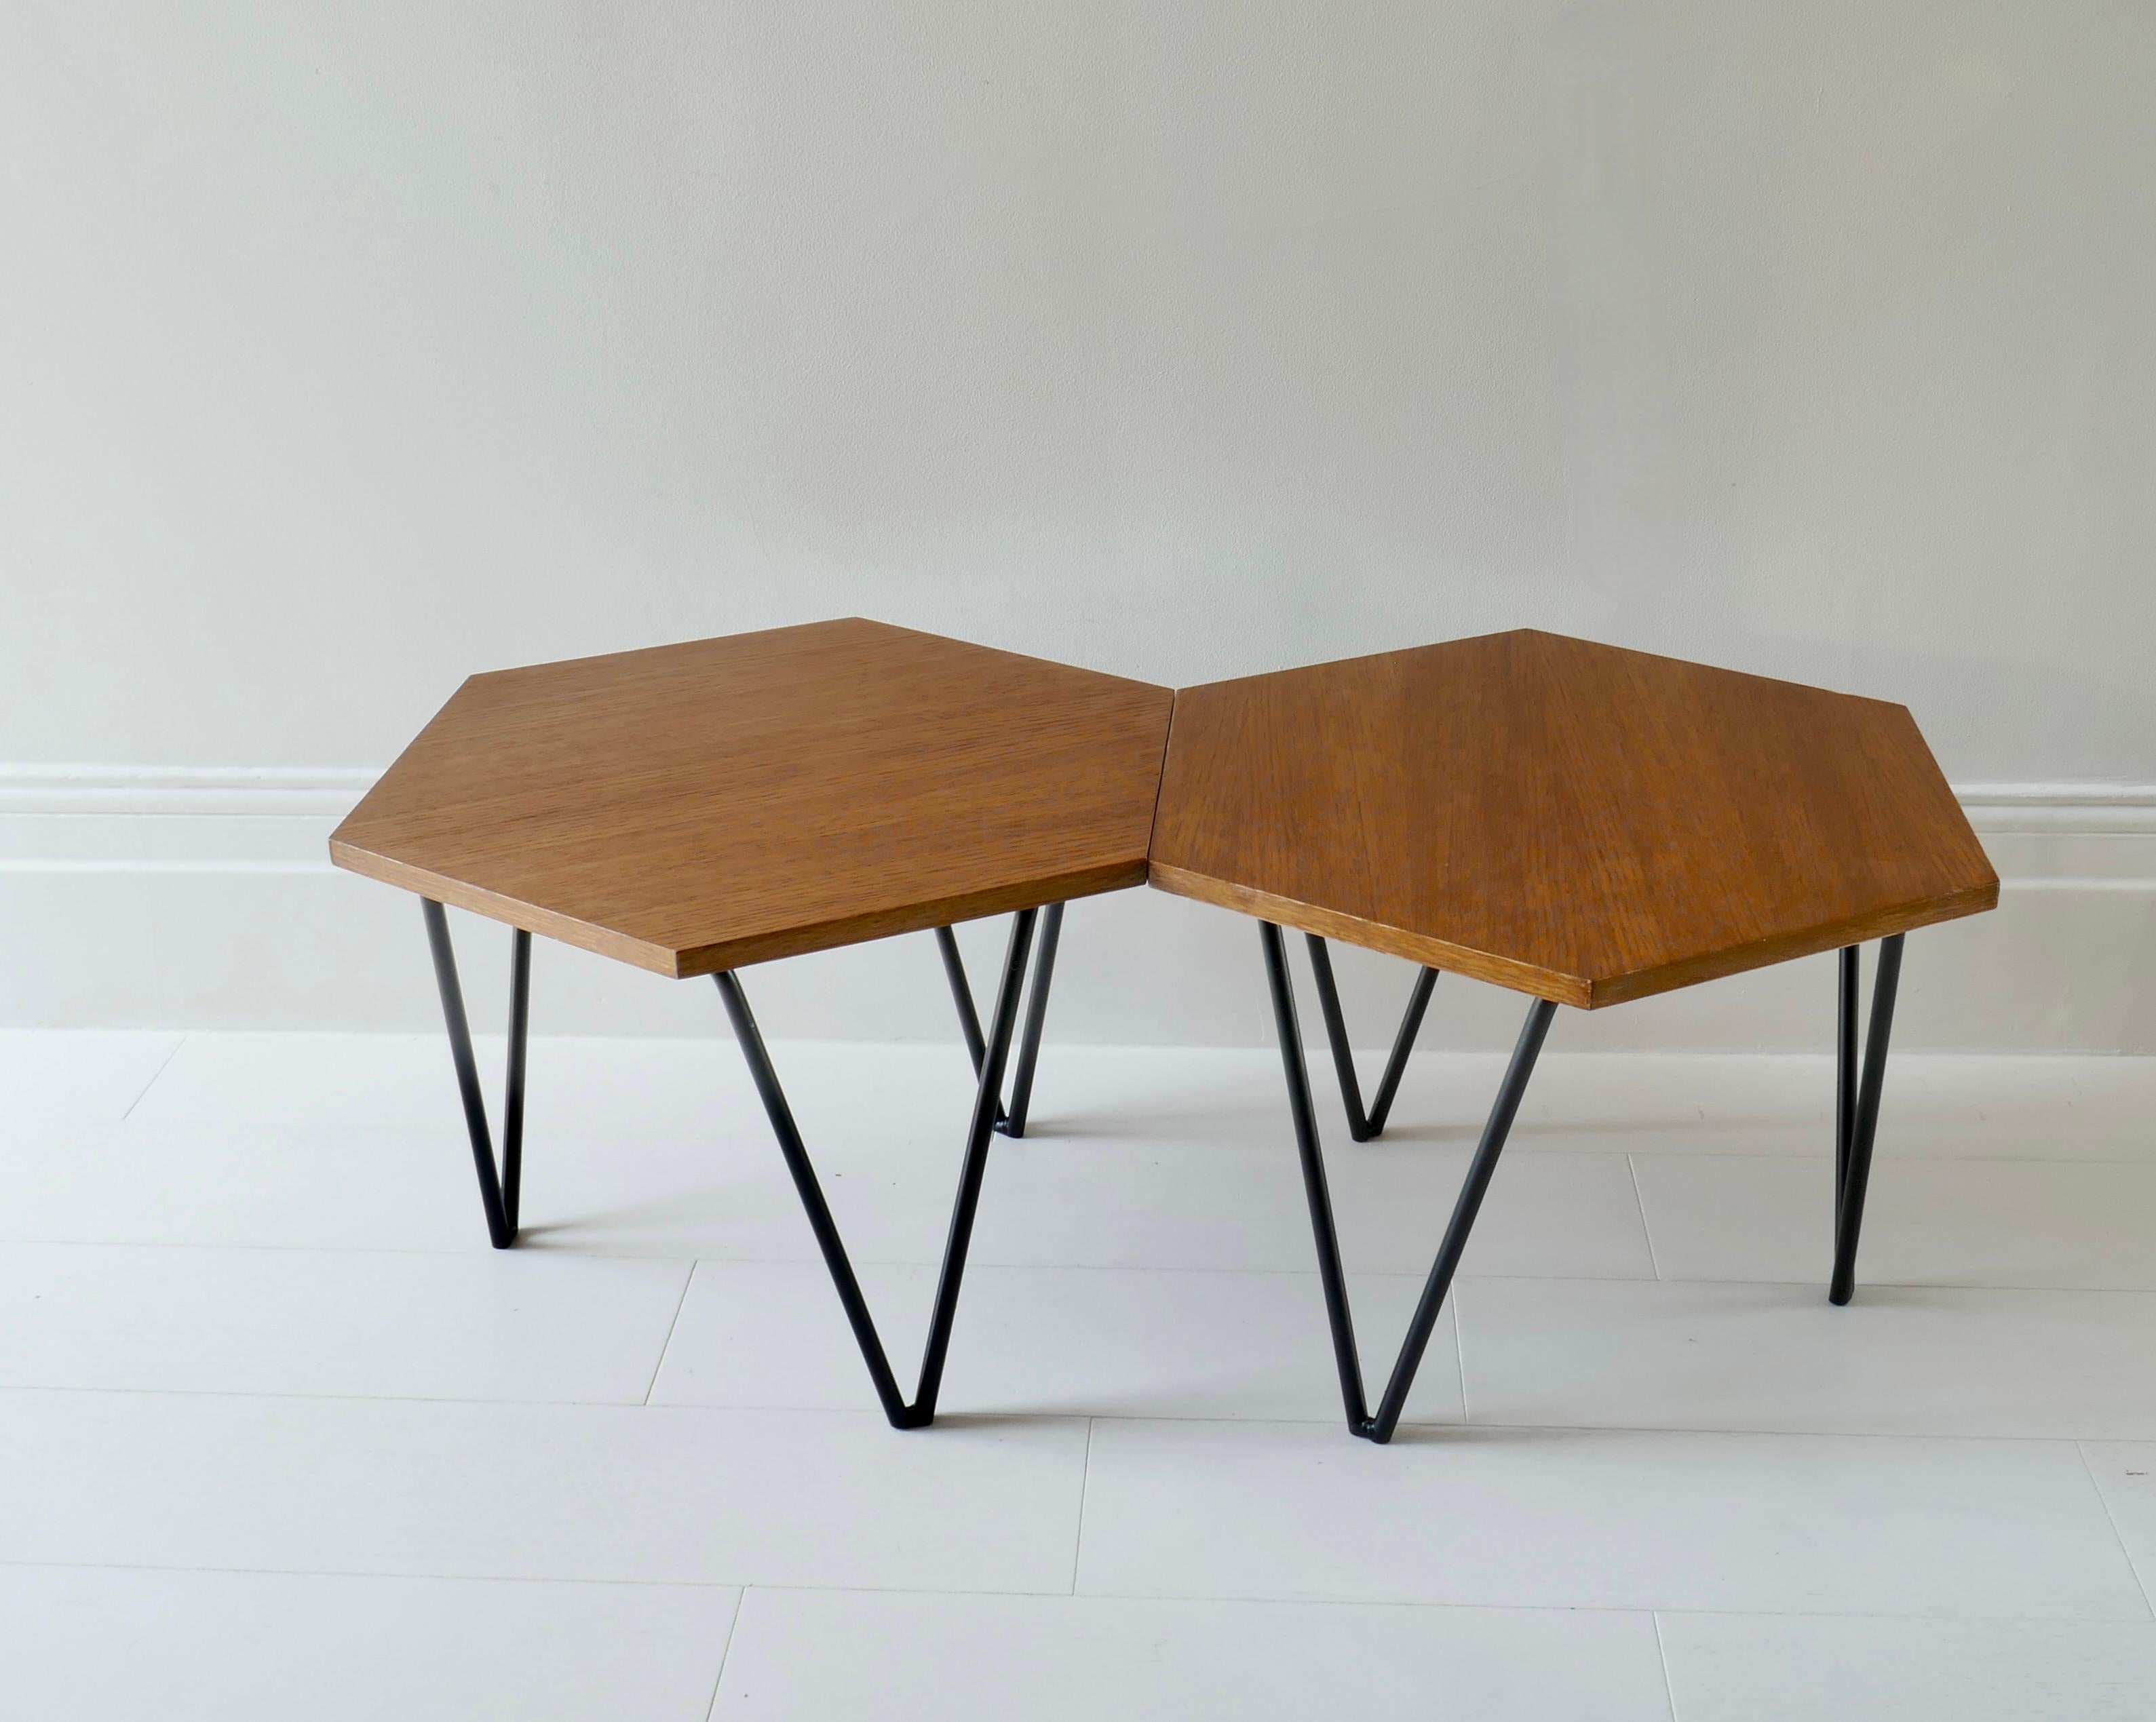 Gio Ponti Set of 2 hexagonal coffee tables by ISA Bergamo, 1950s Italy. 
Stunning pair of hexagonal coffee tables produced by Isa Bergamo for Gio Ponti''s production in the 1950s. Original label.
The pair of small tables has a very elegant and